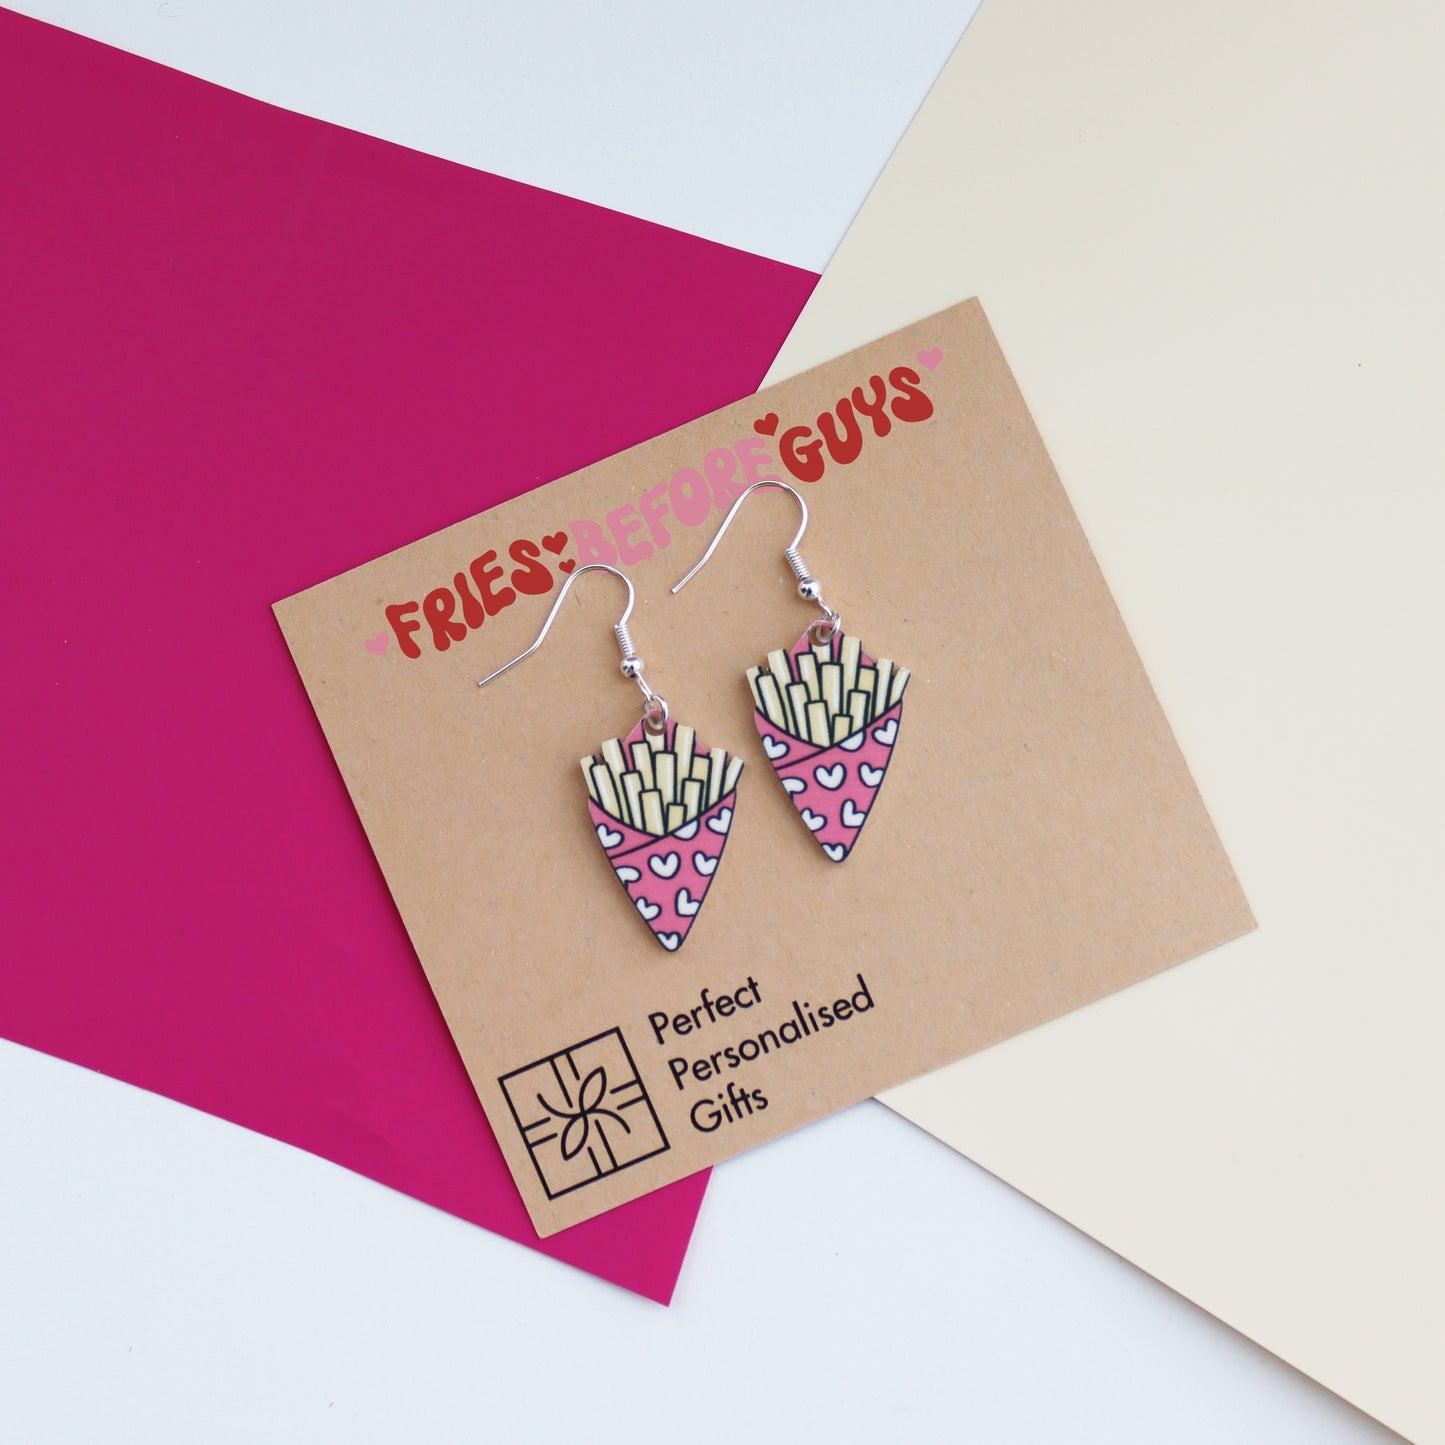 fries before guys earrings cut from acrylic and printed with a bag of chips design the bag of chips is pink and has hearts printed on it shown with an arty background